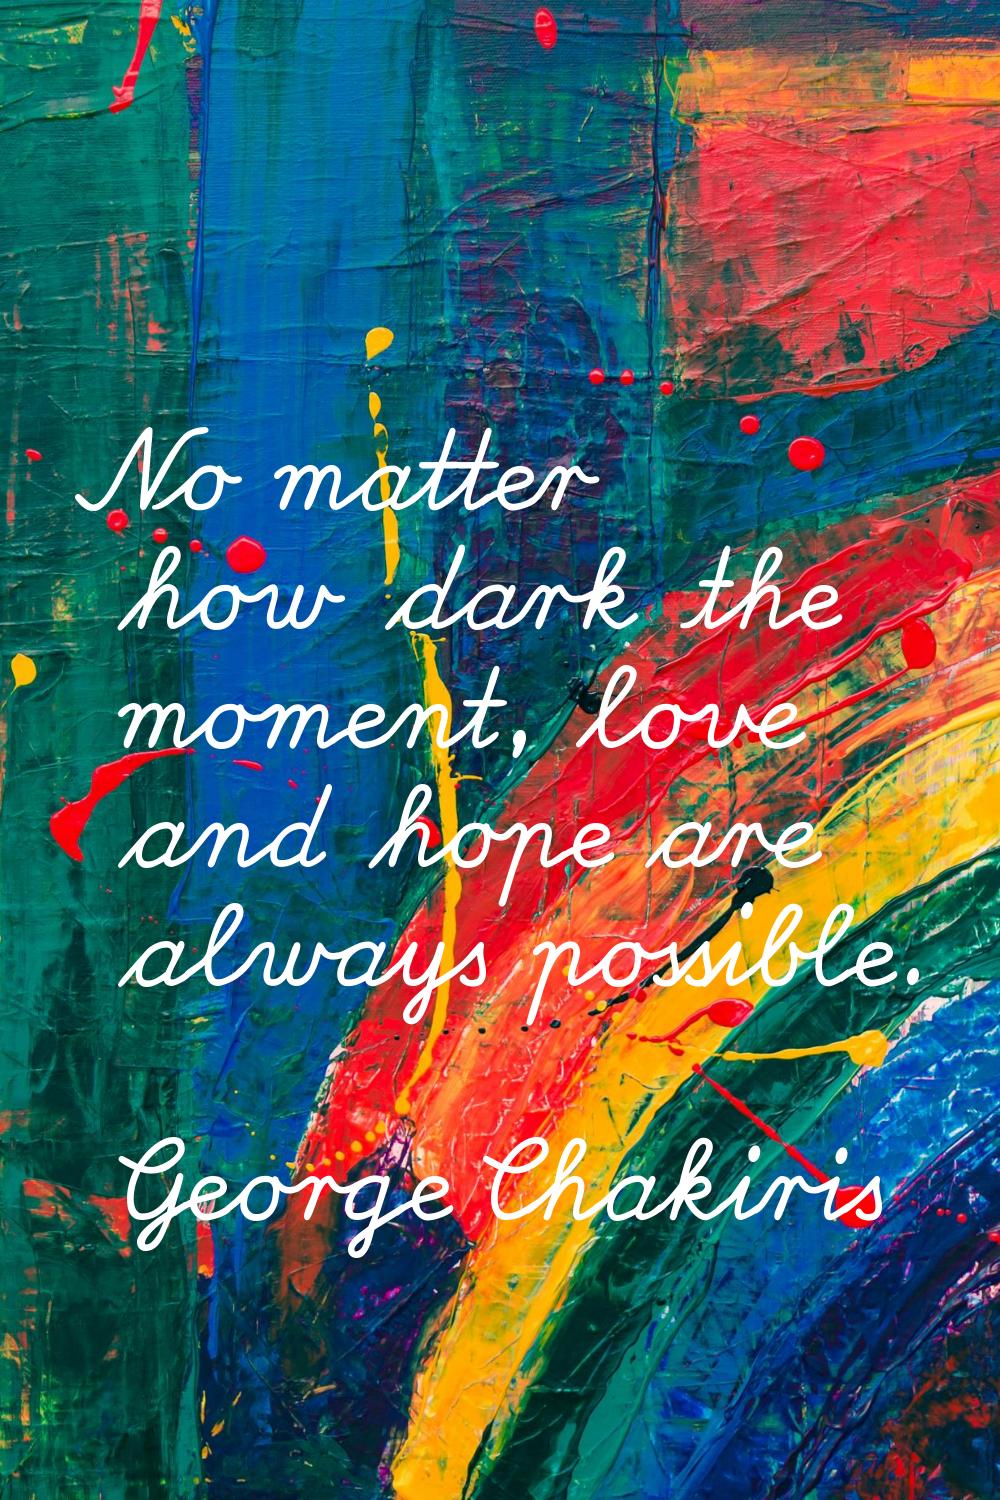 No matter how dark the moment, love and hope are always possible.